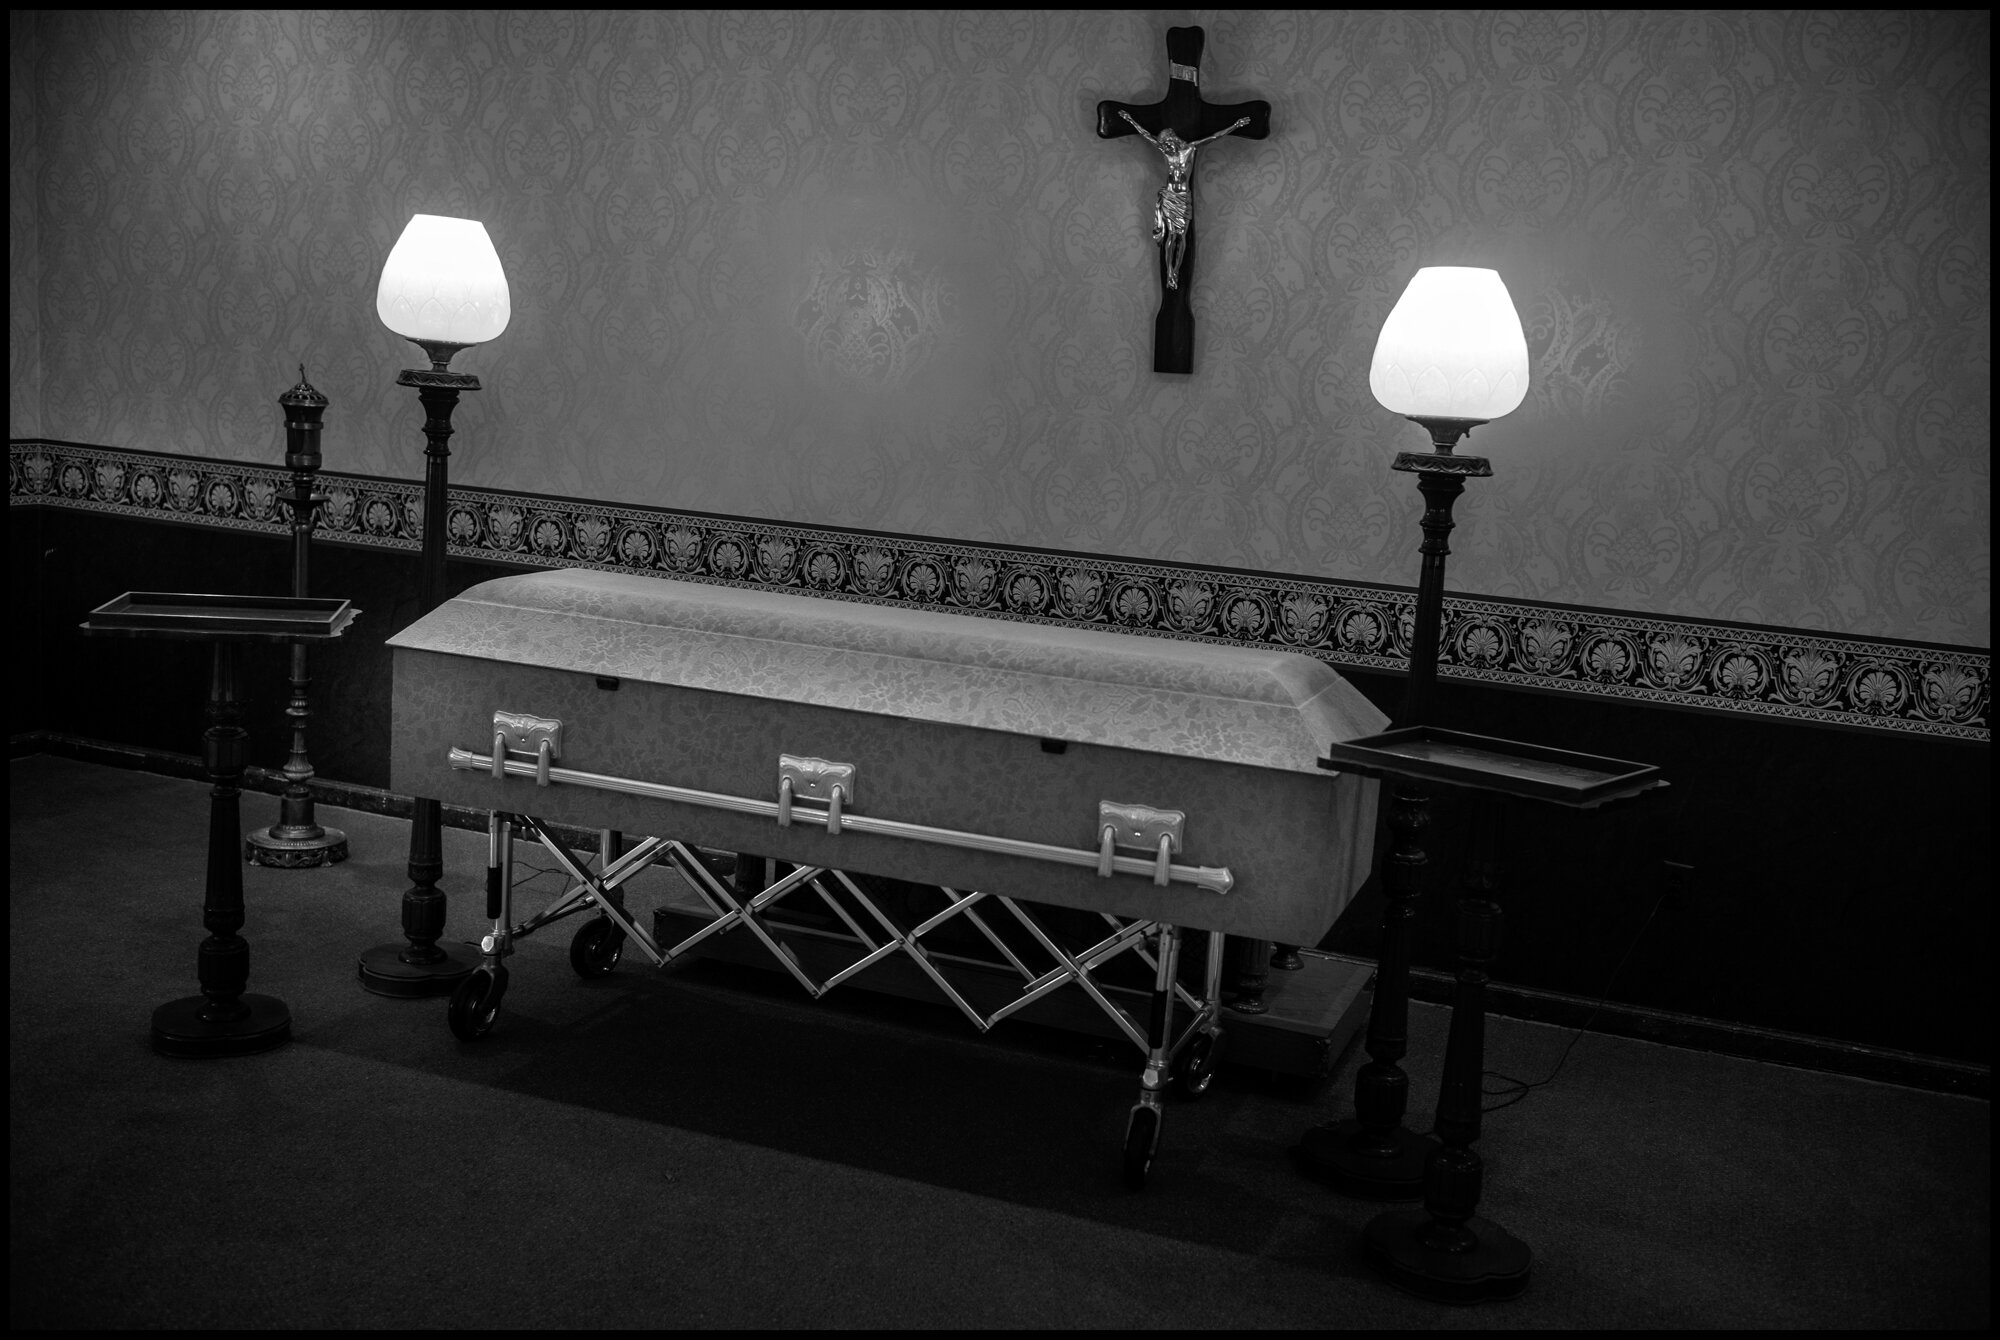  A funeral ceremony for Anthony “Tony” Thomas—a legendary Paramedic in the New York City area, who died of Covid-19 related causes. Bay Ridge, Brooklyn, New York.  April 30, 2020. © Peter Turnley  ID# 32-002 